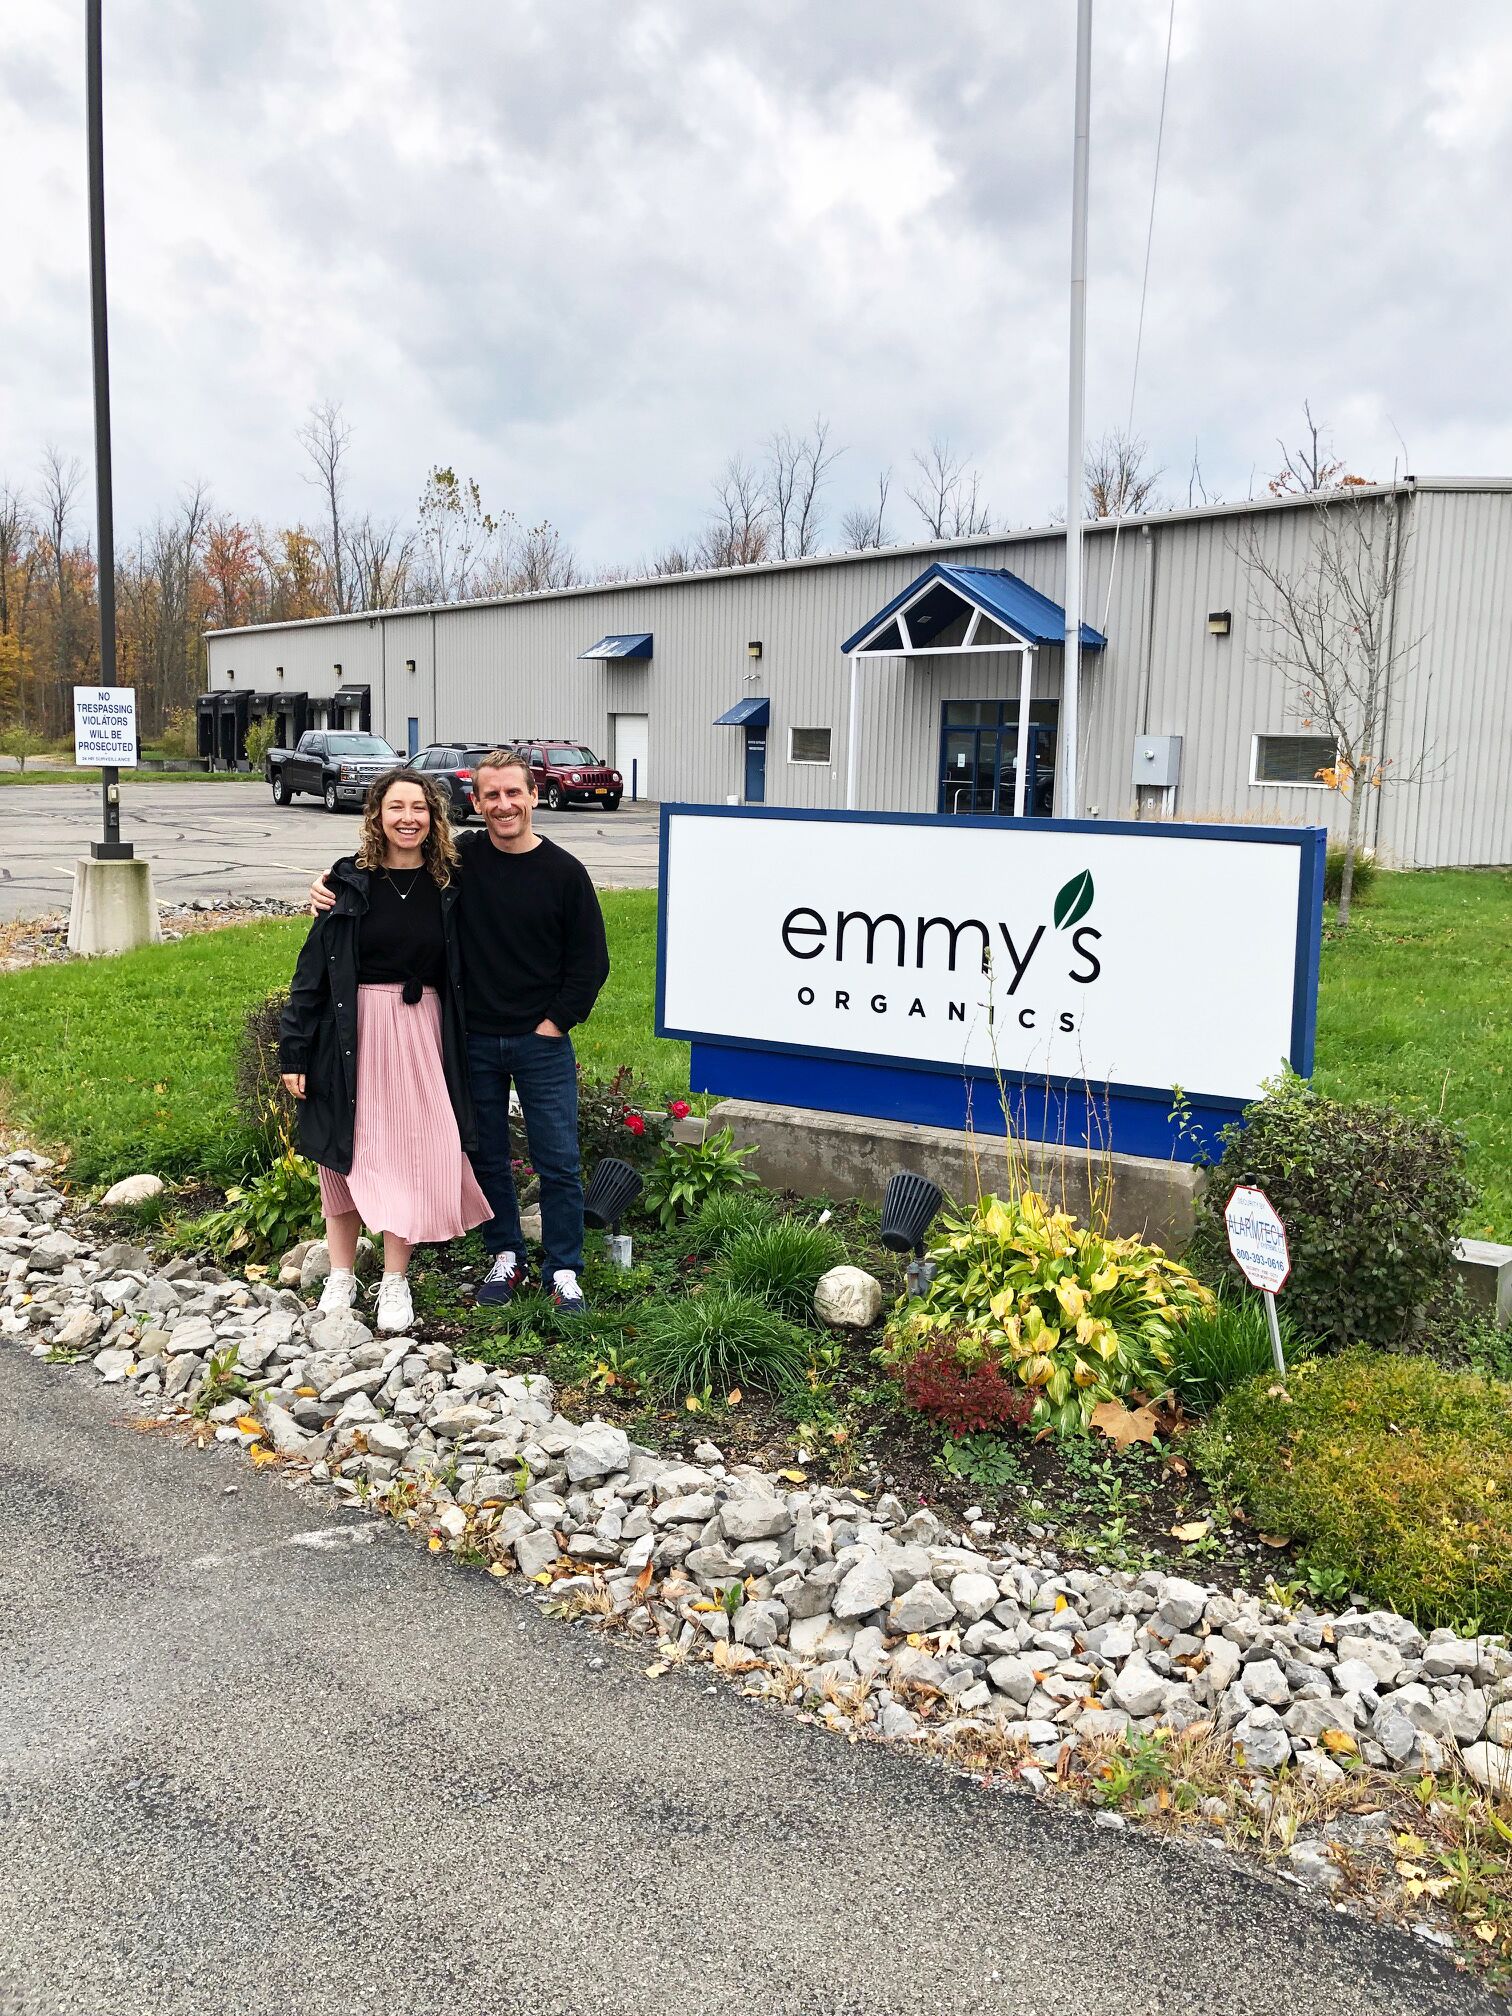 To support the expansion of cookie manufacturer Emmy’s Organics to a new location in Dryden N.Y., TCAD delivered a $150,000 loan. Shown are Emmy's owners Ian Gaffney and Samantha Abrams.